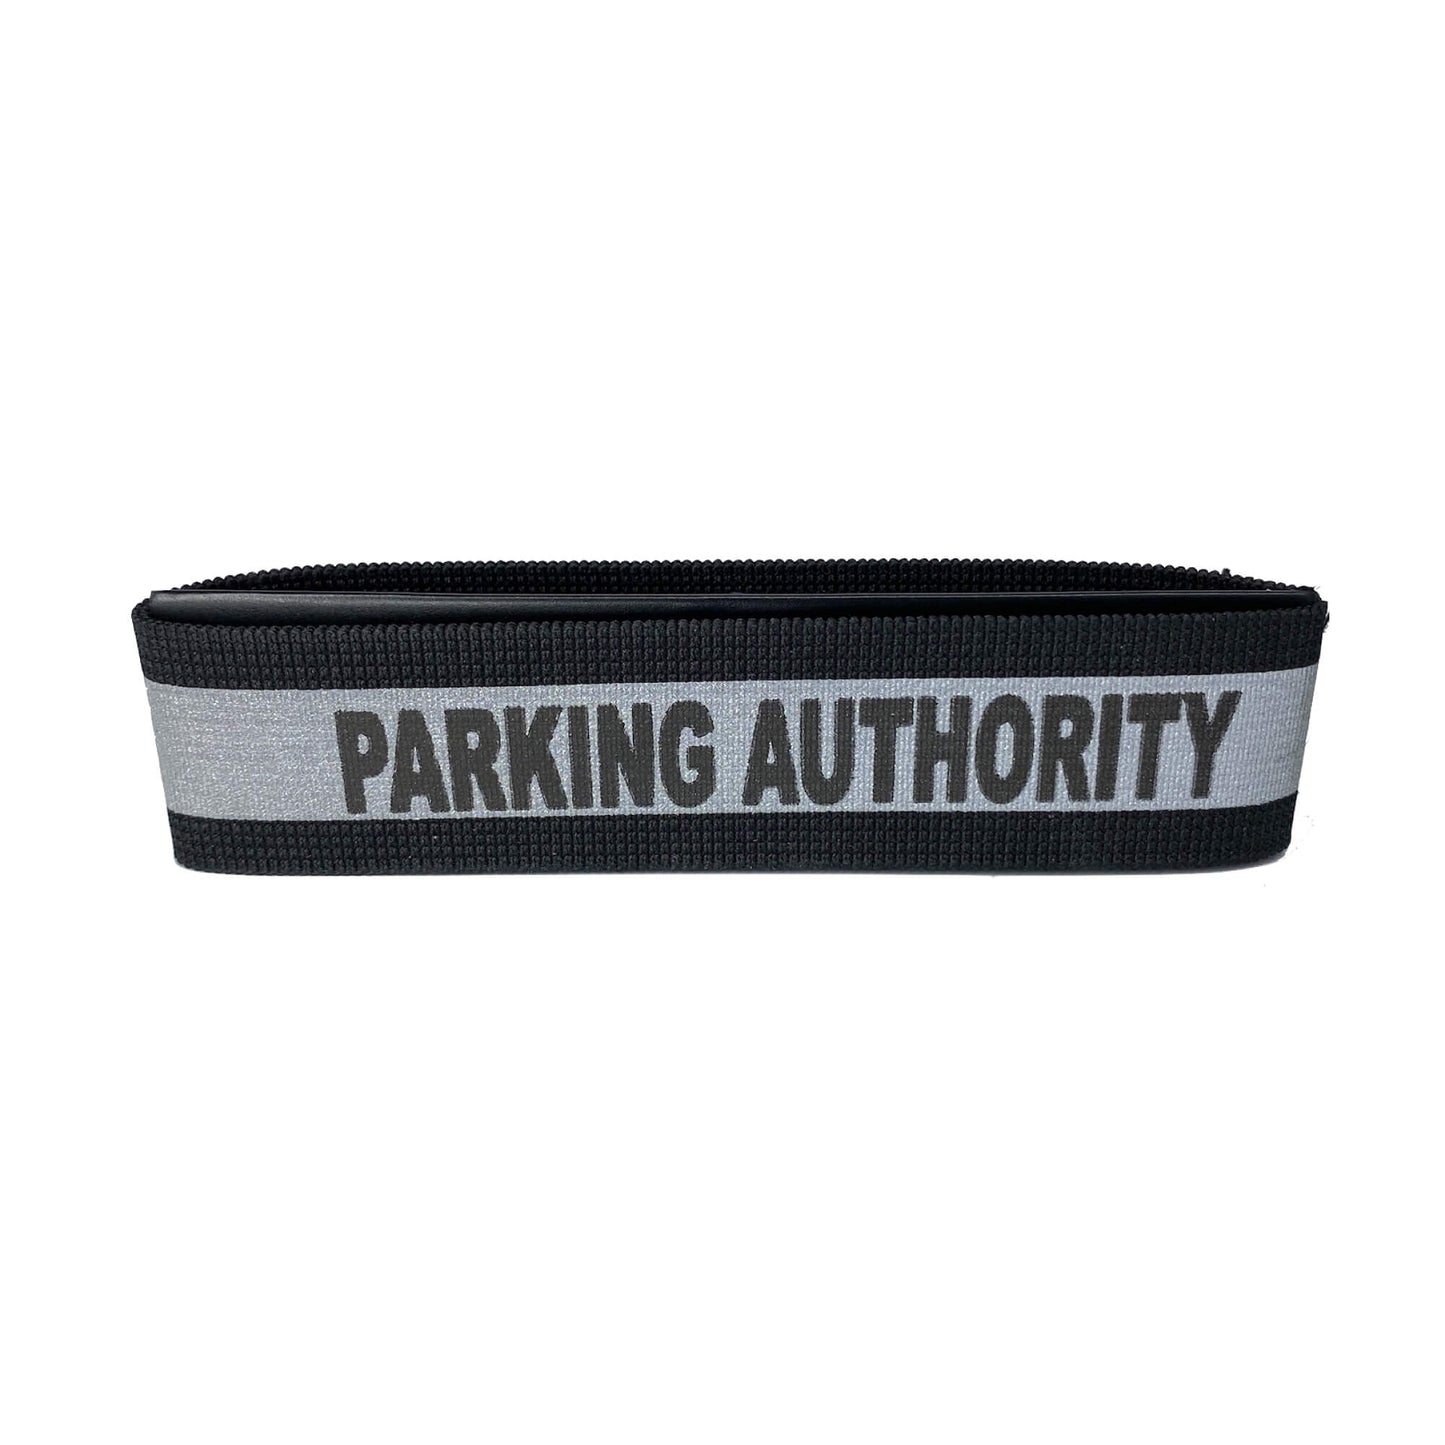 Parking Authority Notebook ID Band-Notebands-911 Duty Gear Canada